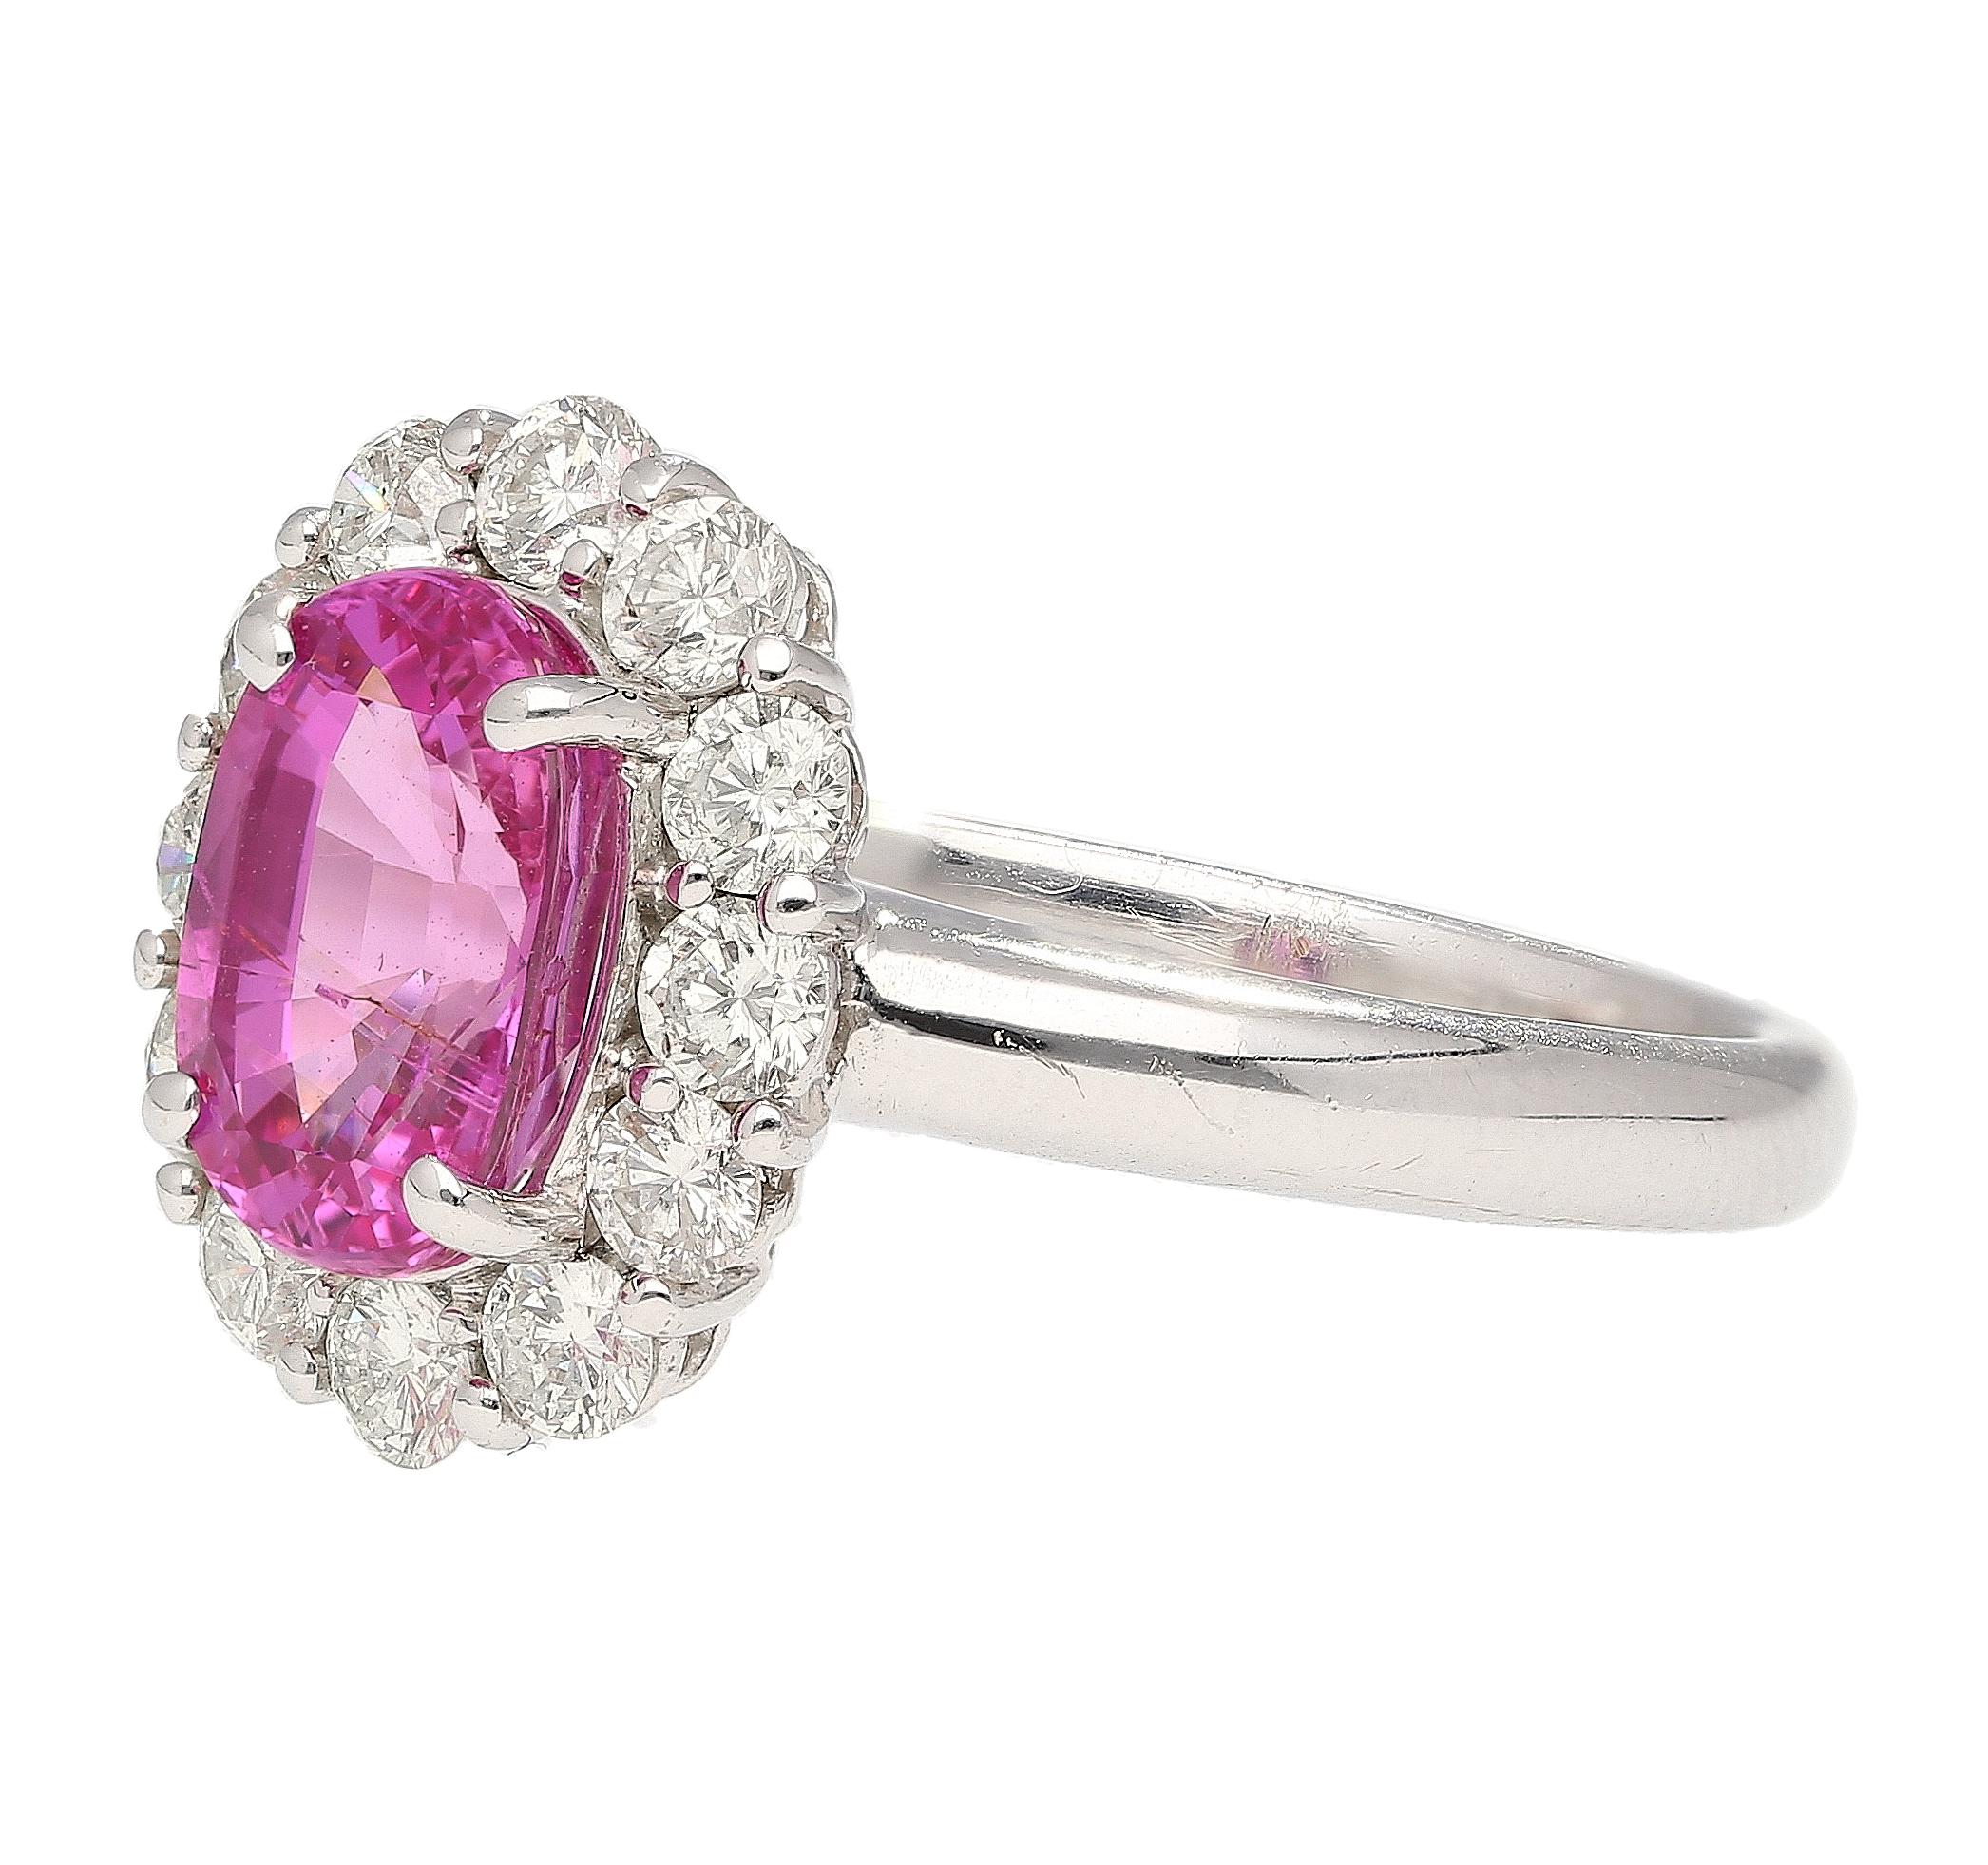 Women's 3.96 Carat Oval Cut Pink Sapphire and Diamond Halo Ring in 18k White Gold For Sale